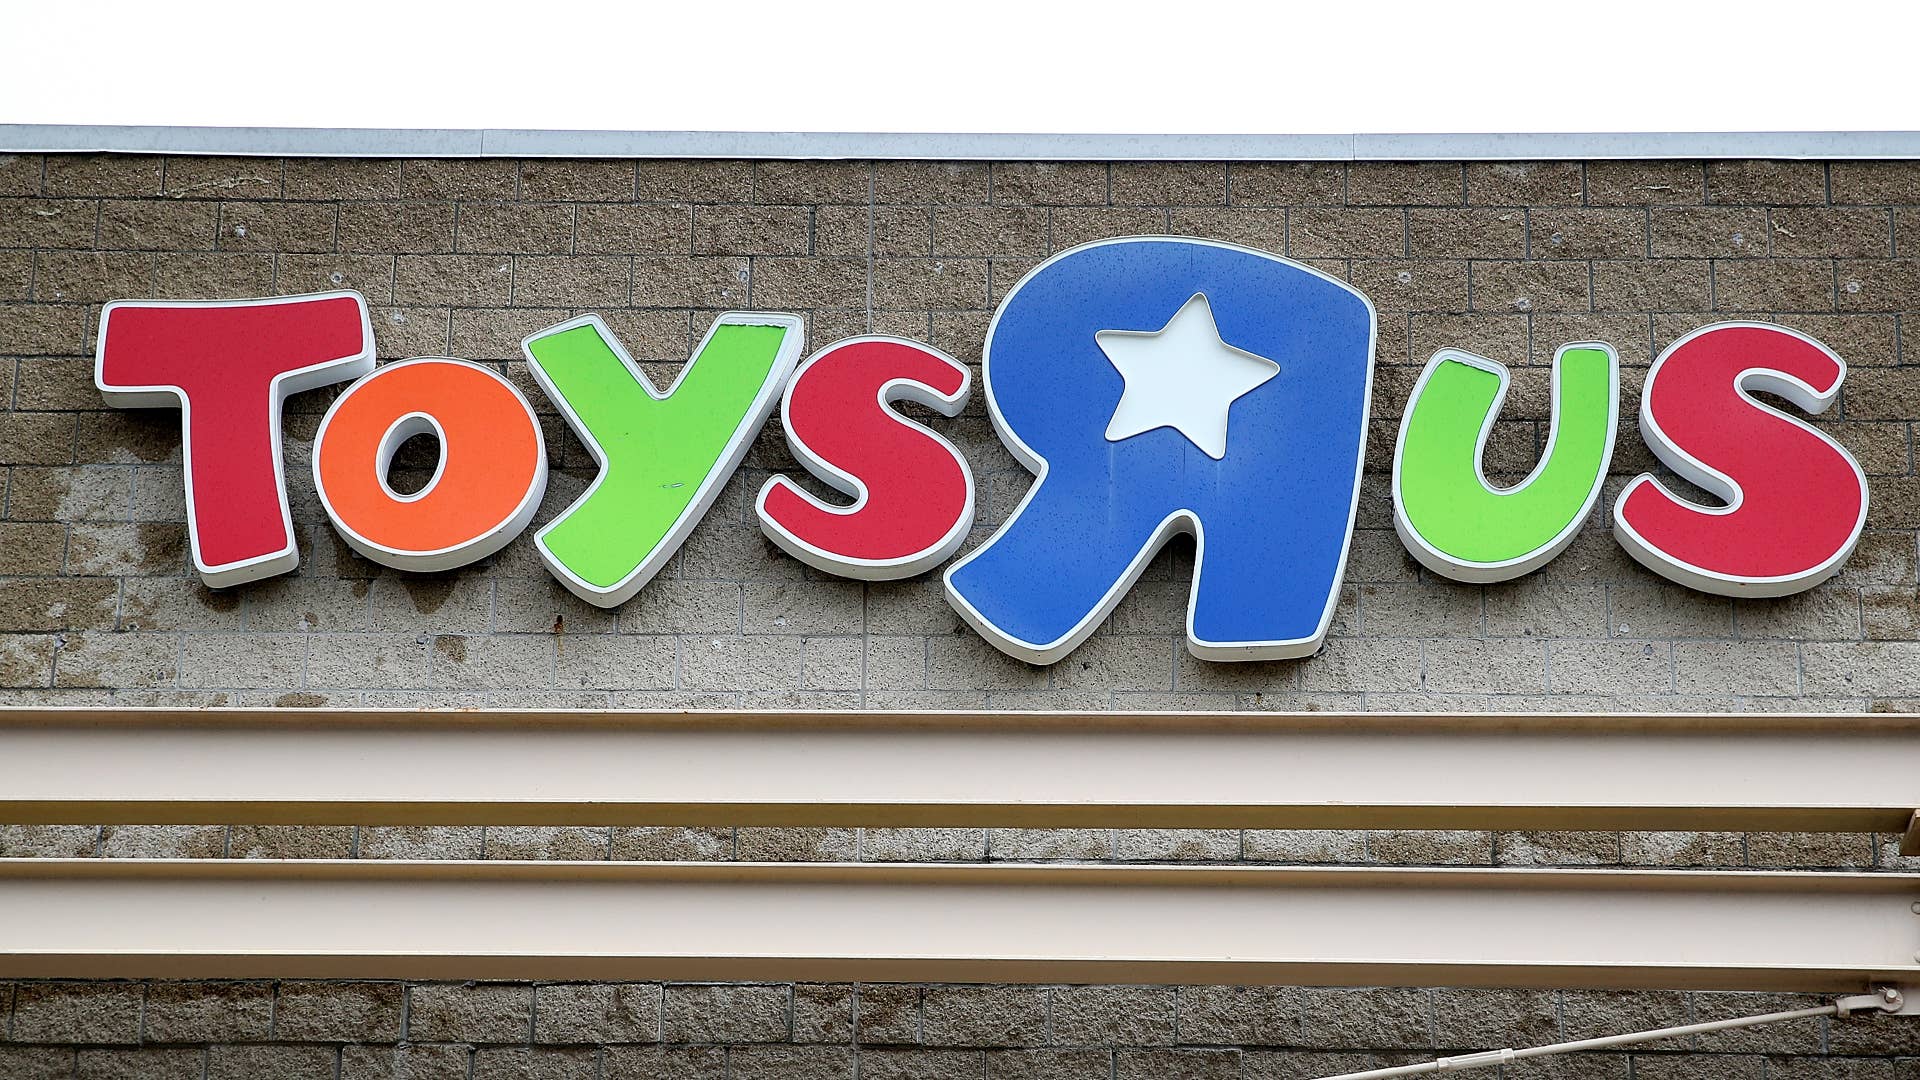 The Toys R Us logo is displayed on the exterior of a store on March 15, 2018 in Emeryville, California.